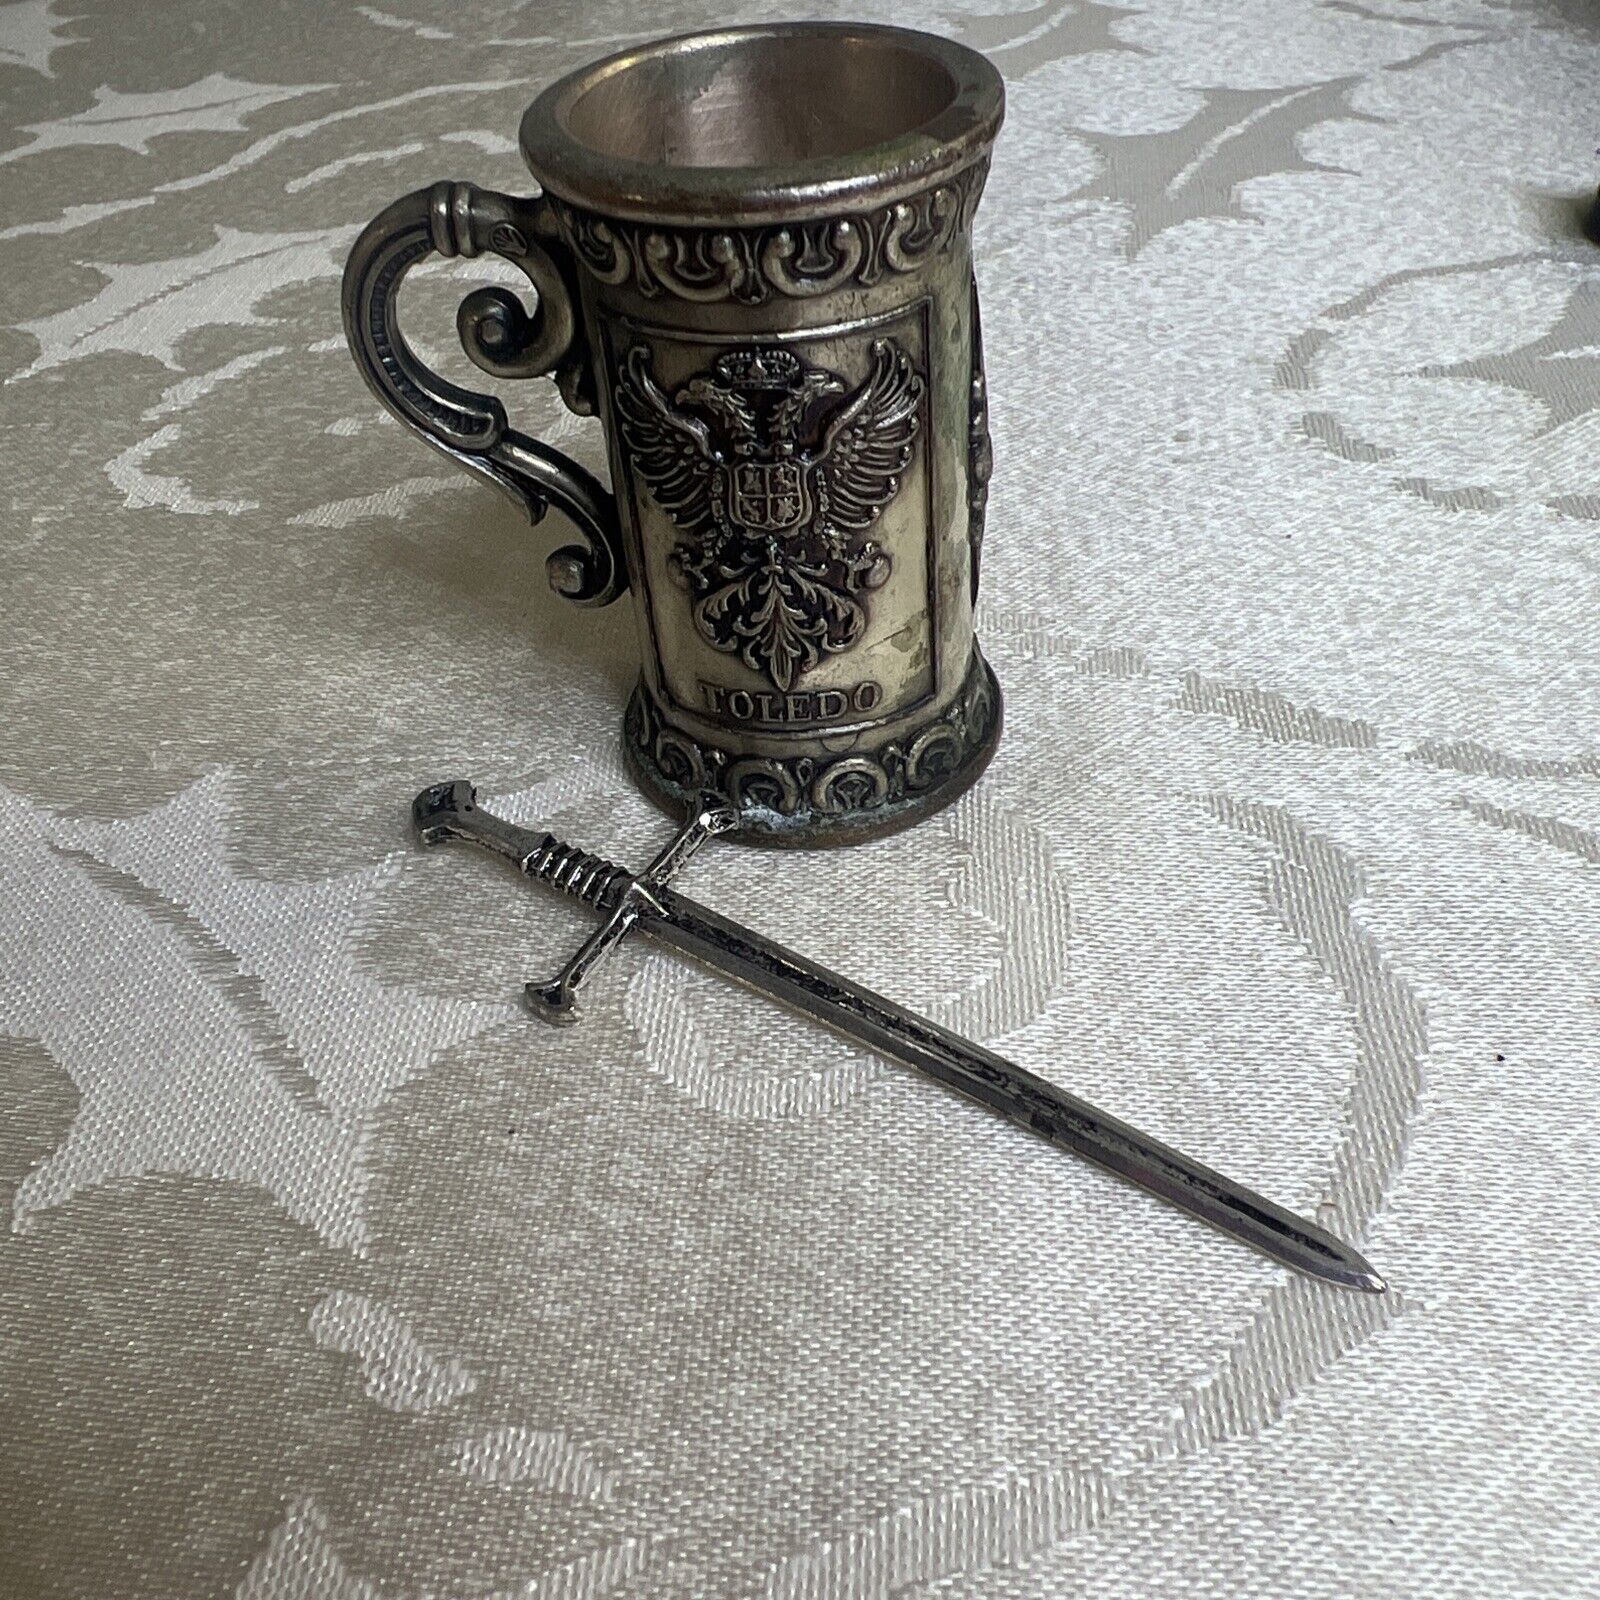 Candlestick Pewter Small Cup Decor Artifact Vintage Metal Rare Toledo Spain Beer